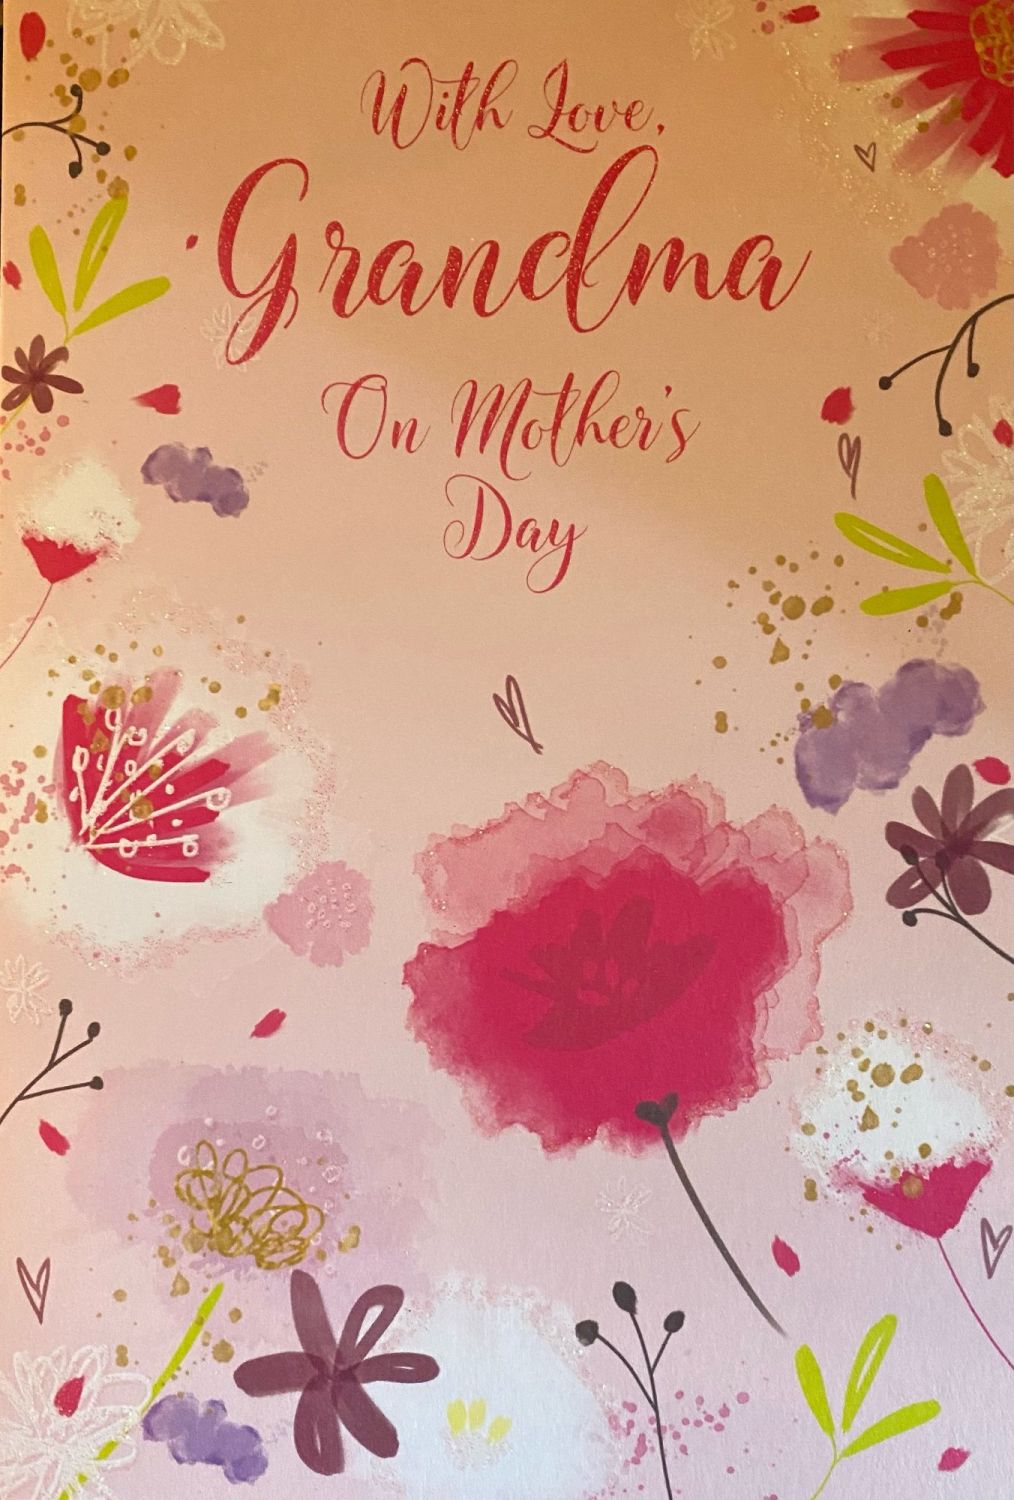 With Love, Grandma On Mother's Day